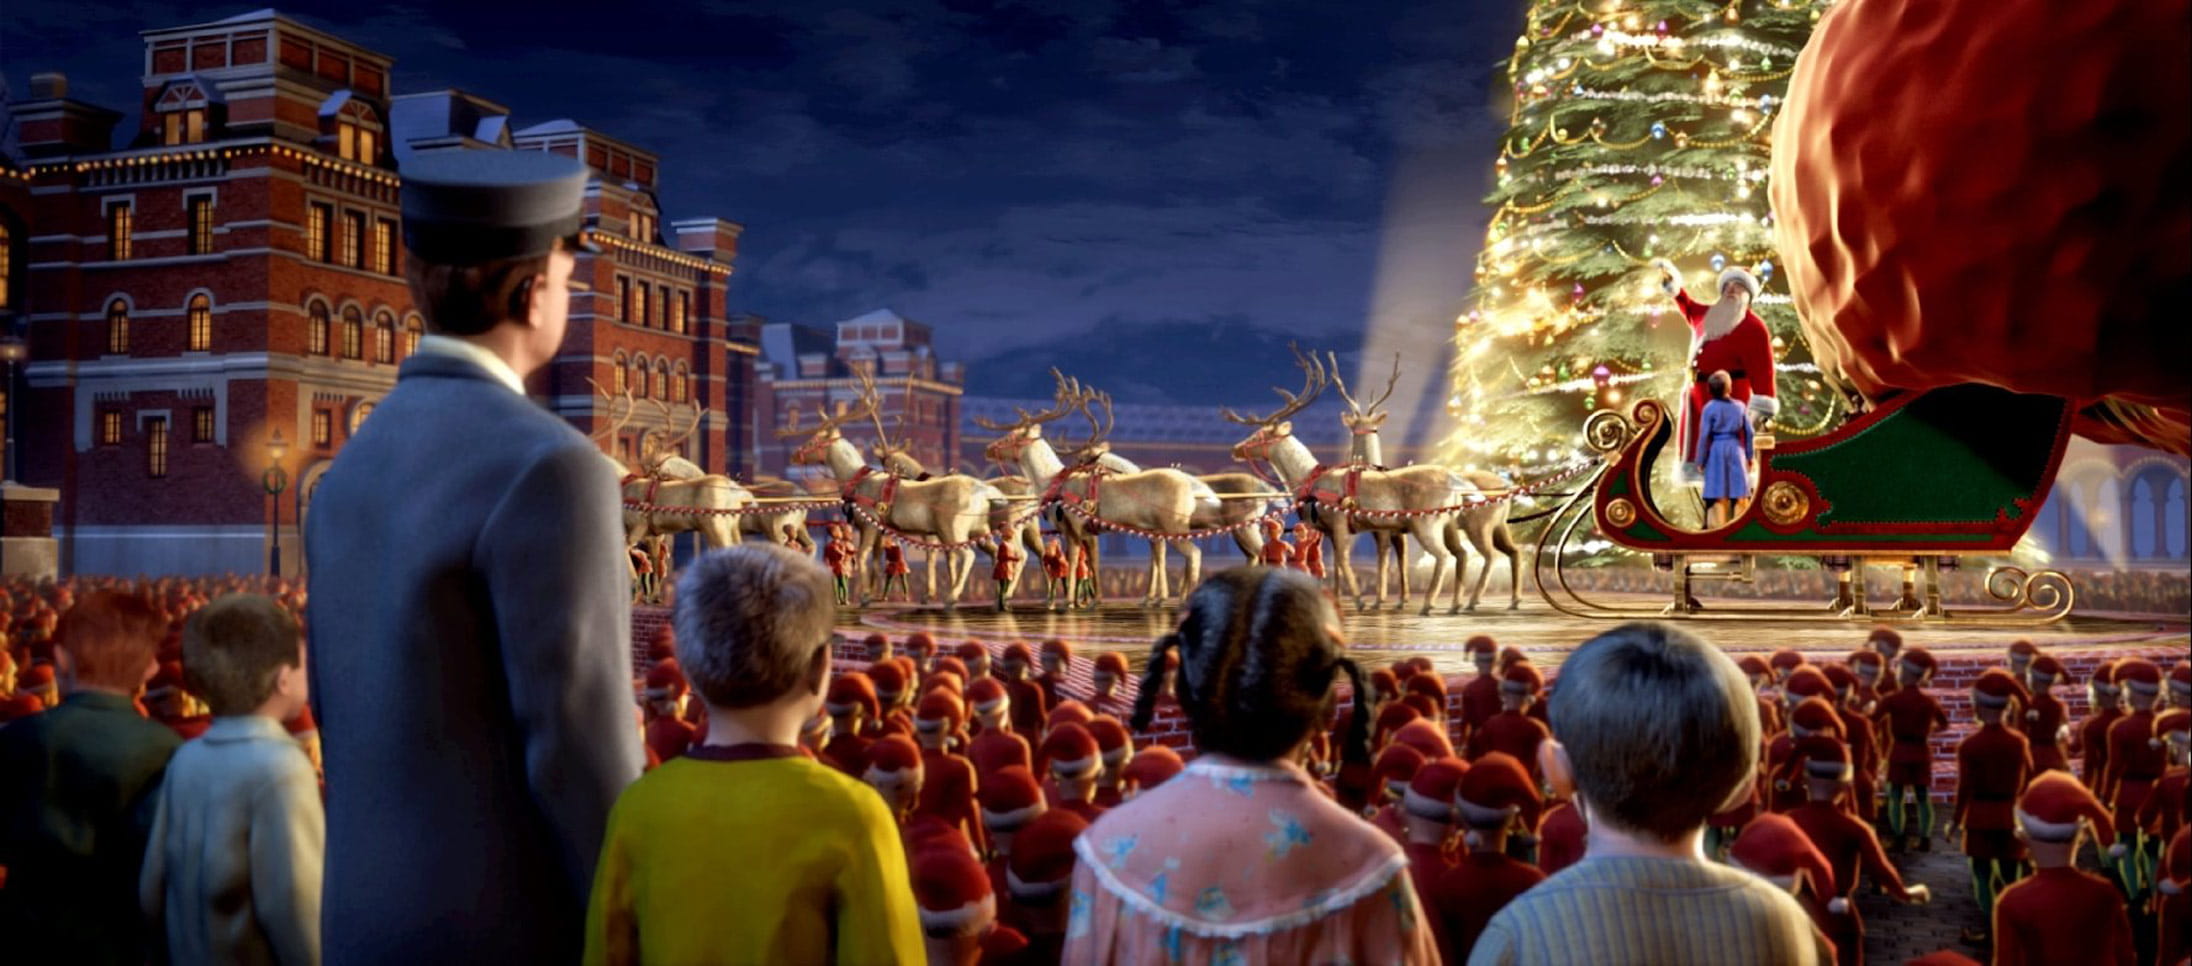 A scene from The Polar Express (2004)